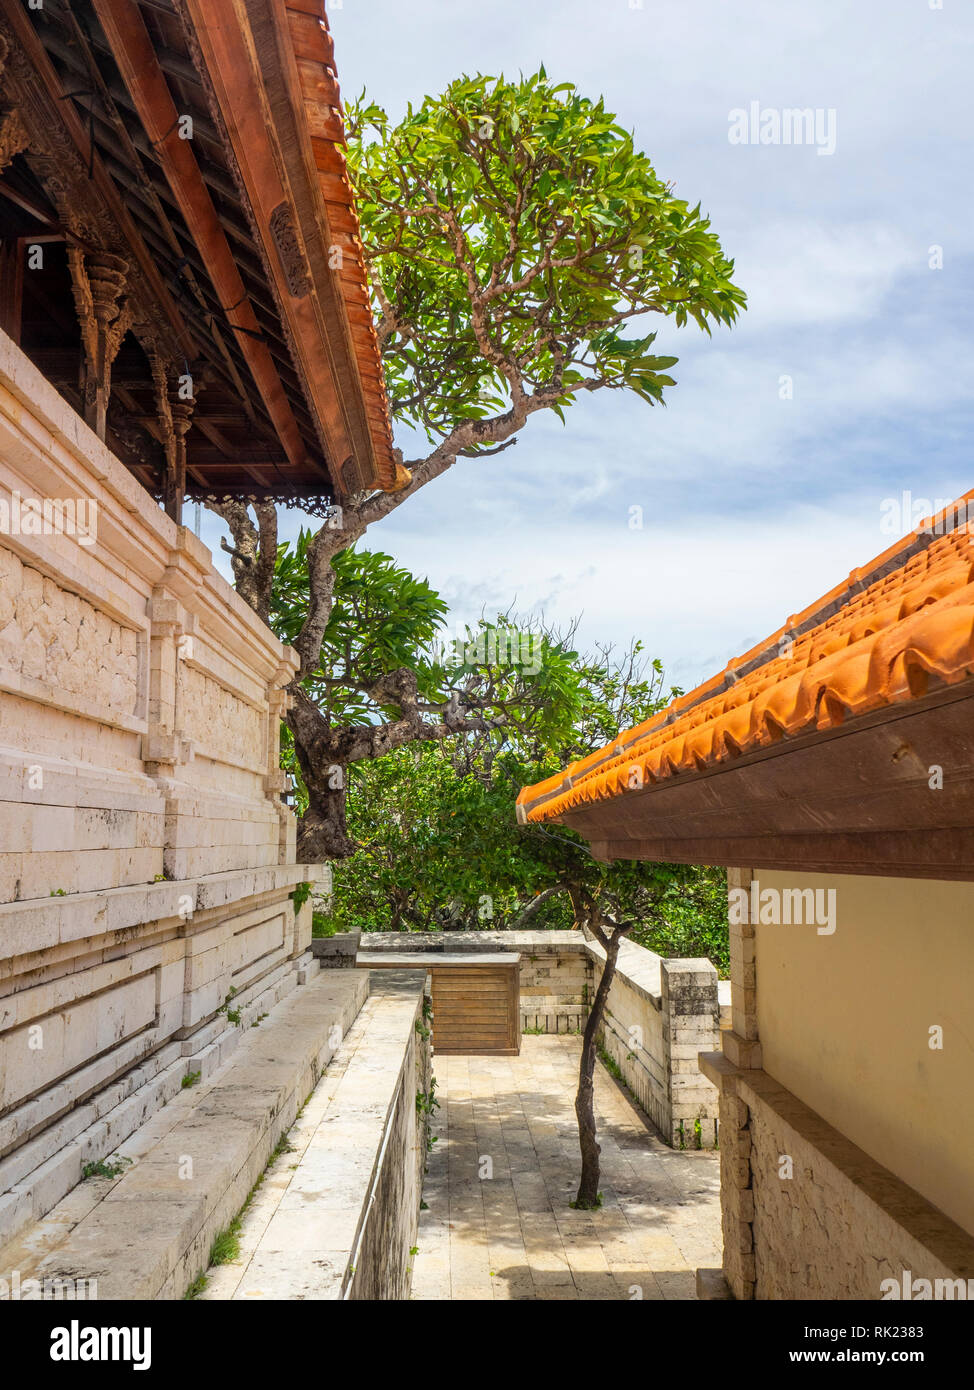 Terracotta roof and temple buildings at Uluwatu Temple compound, Bali Indonesia. Stock Photo